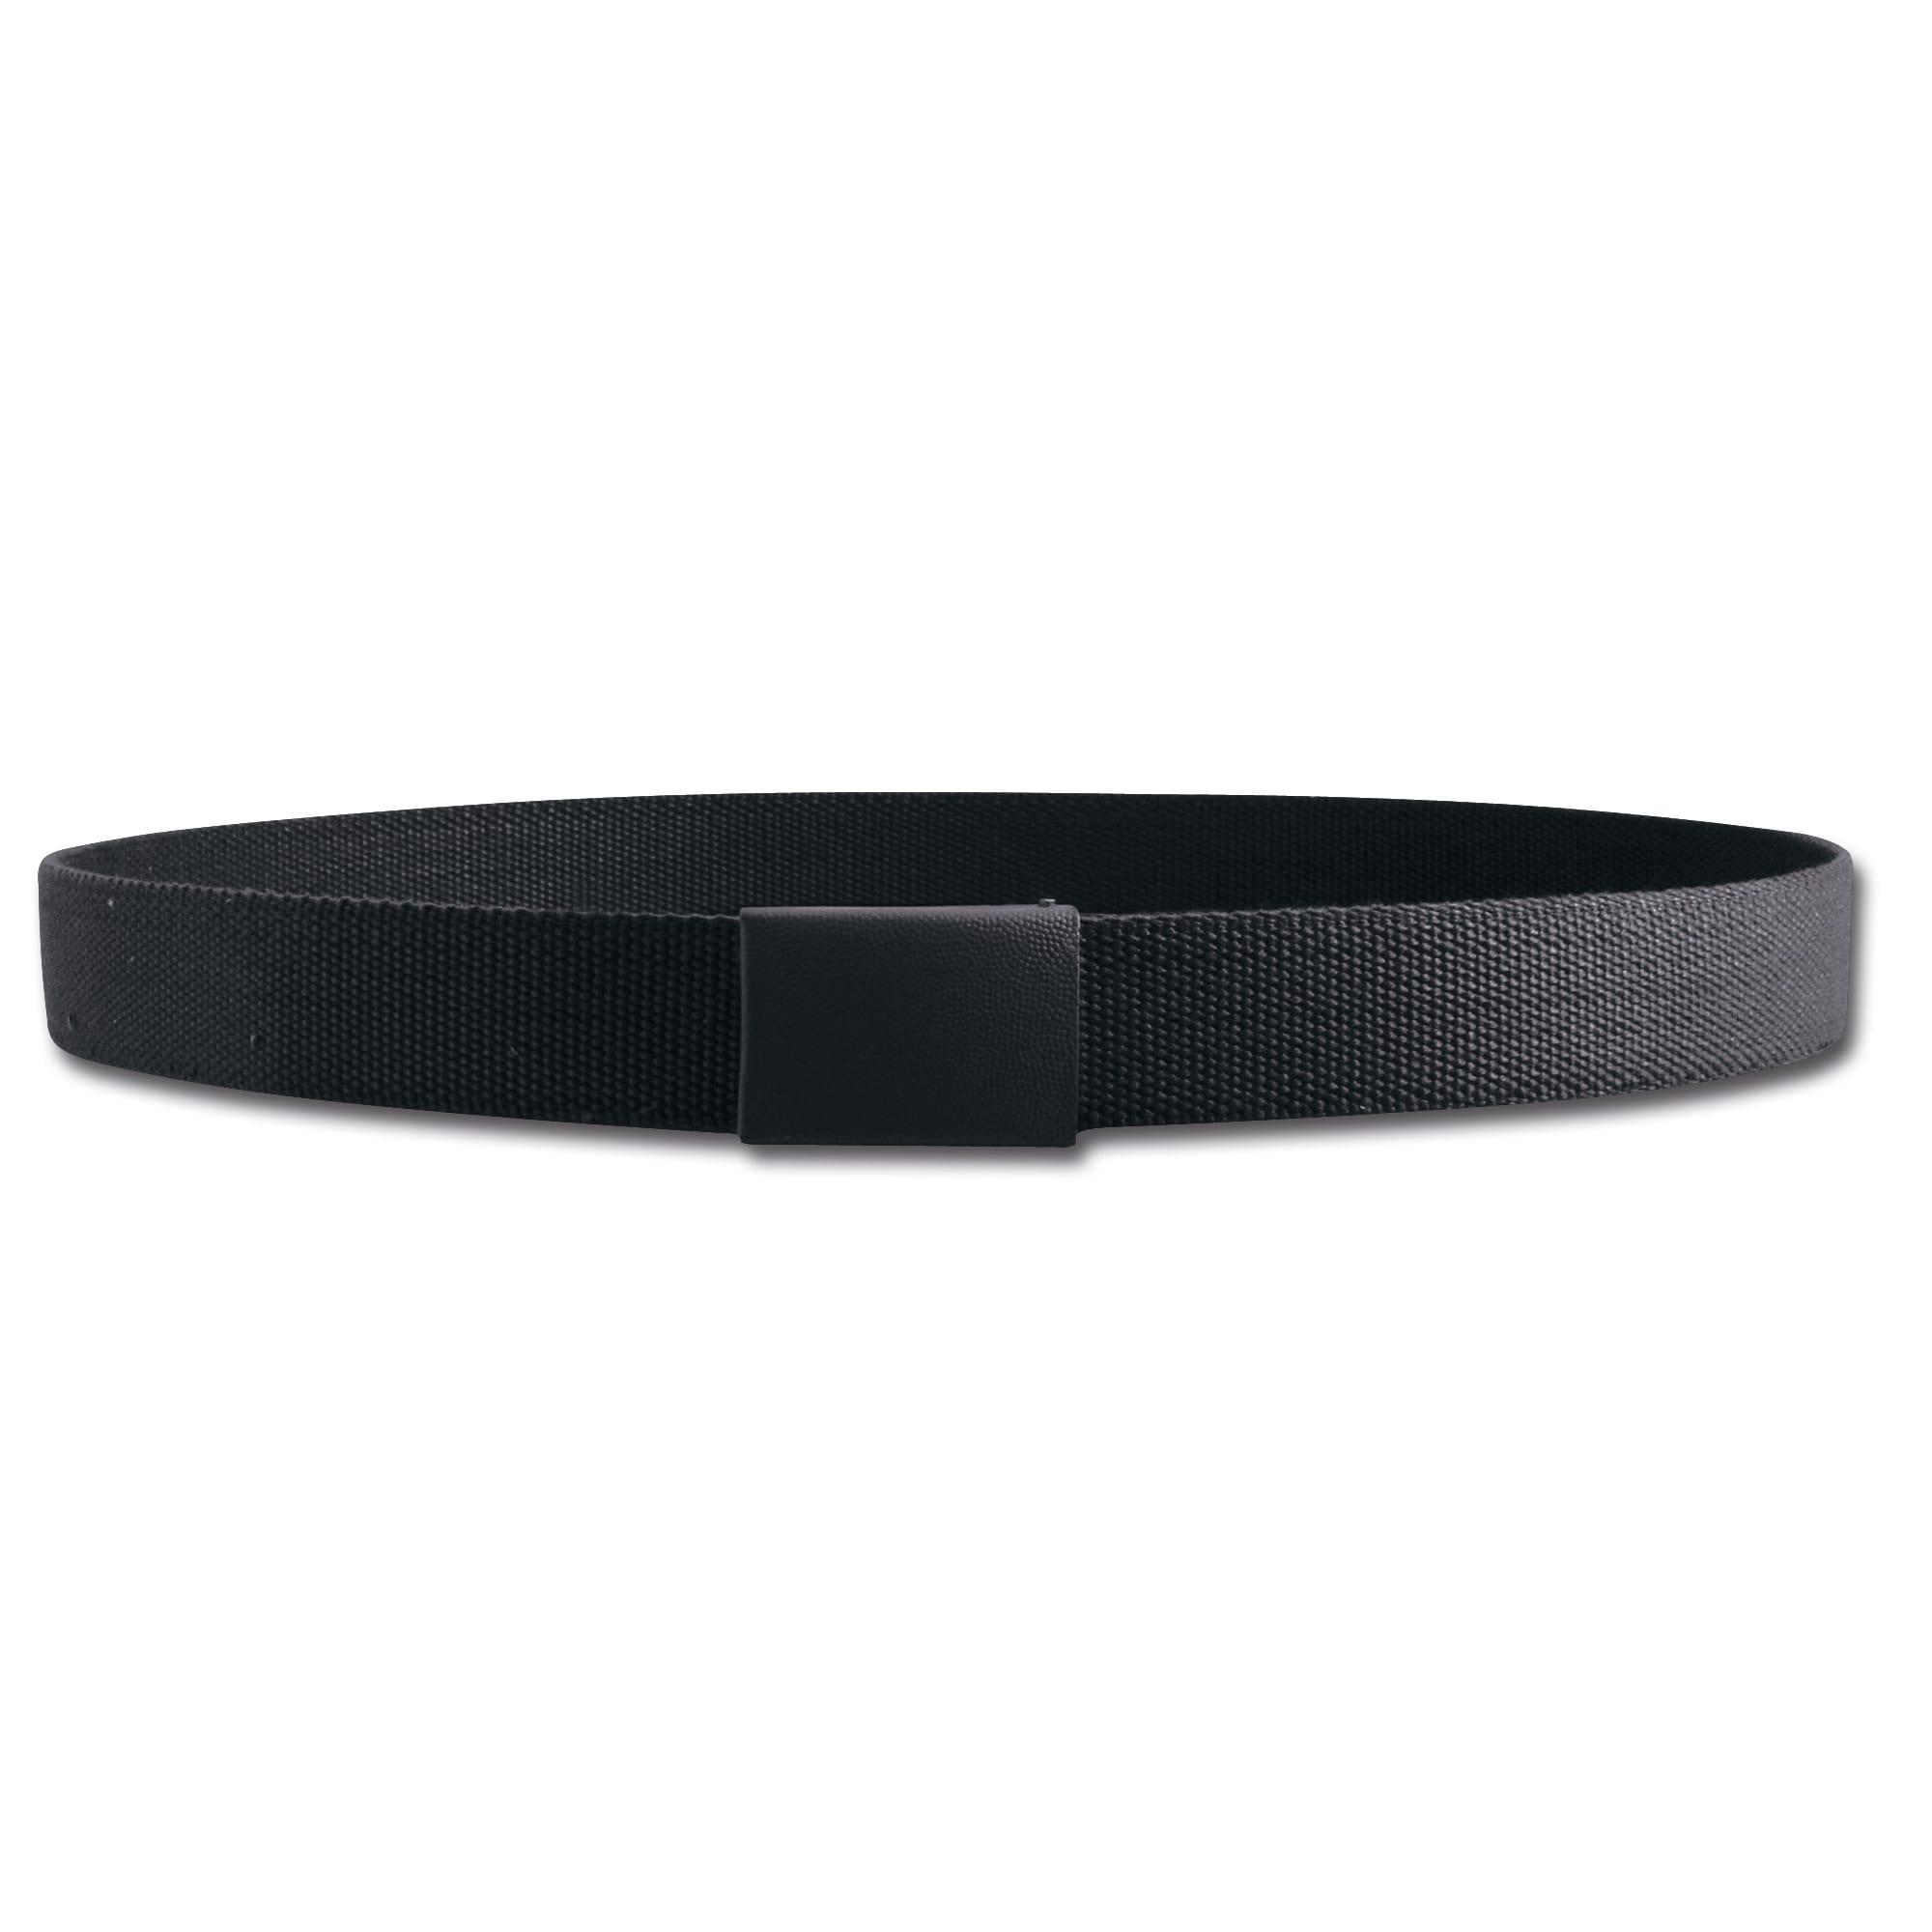 Purchase the German Army Belt Textile black by ASMC